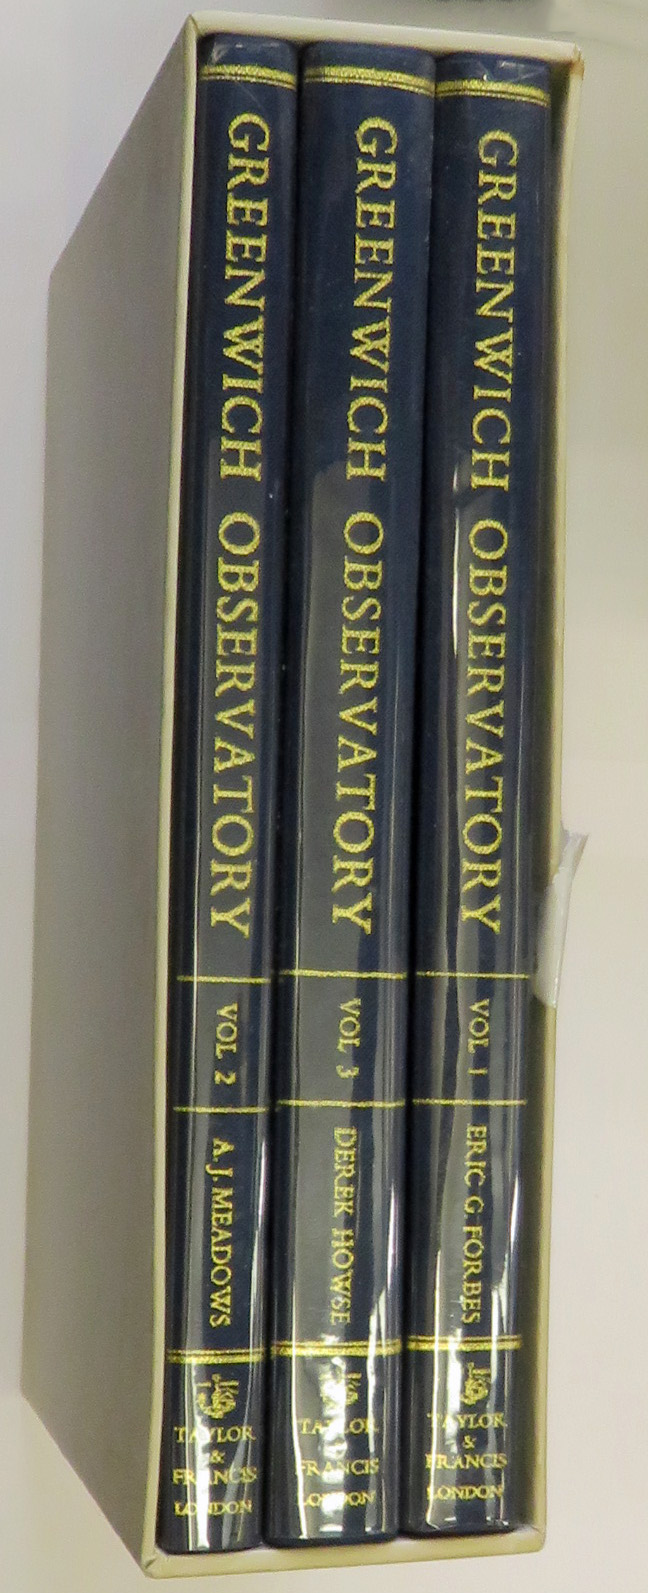 Greenwich Observatory 1675-1975 in Three Volumes